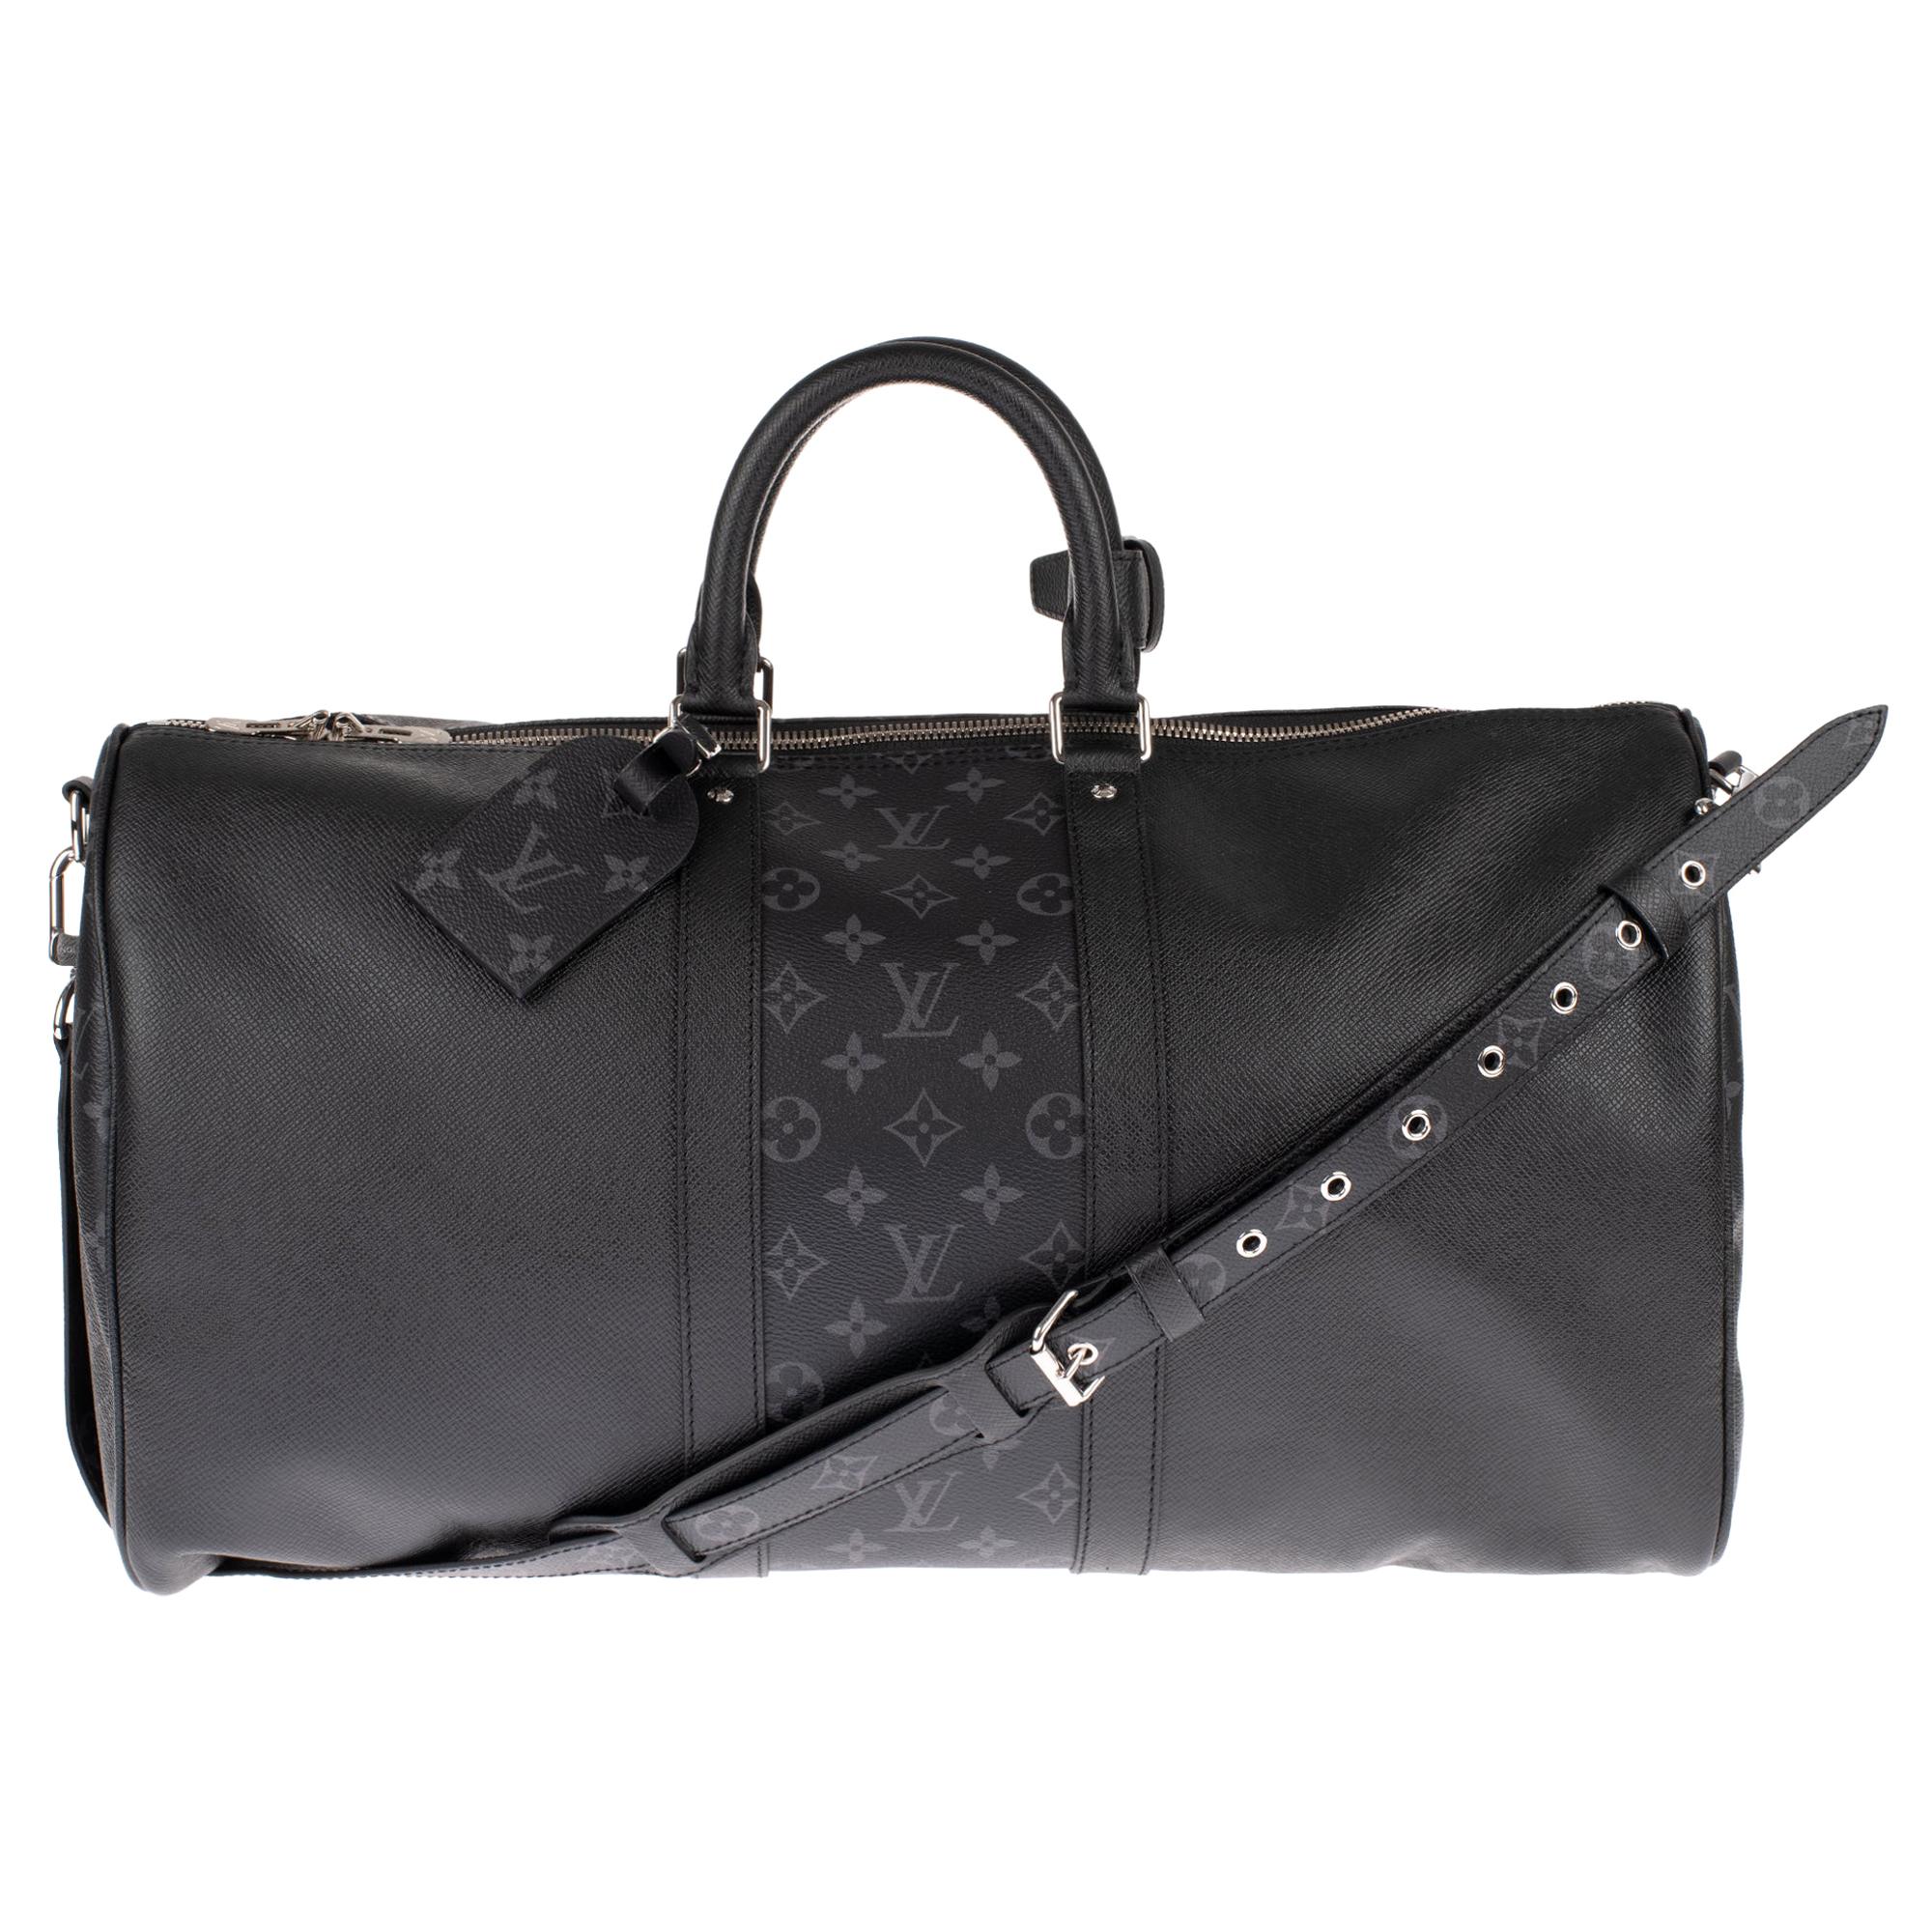 Rare brand new Louis Vuitton Keepall 50 Taigarama travel bag with strap !